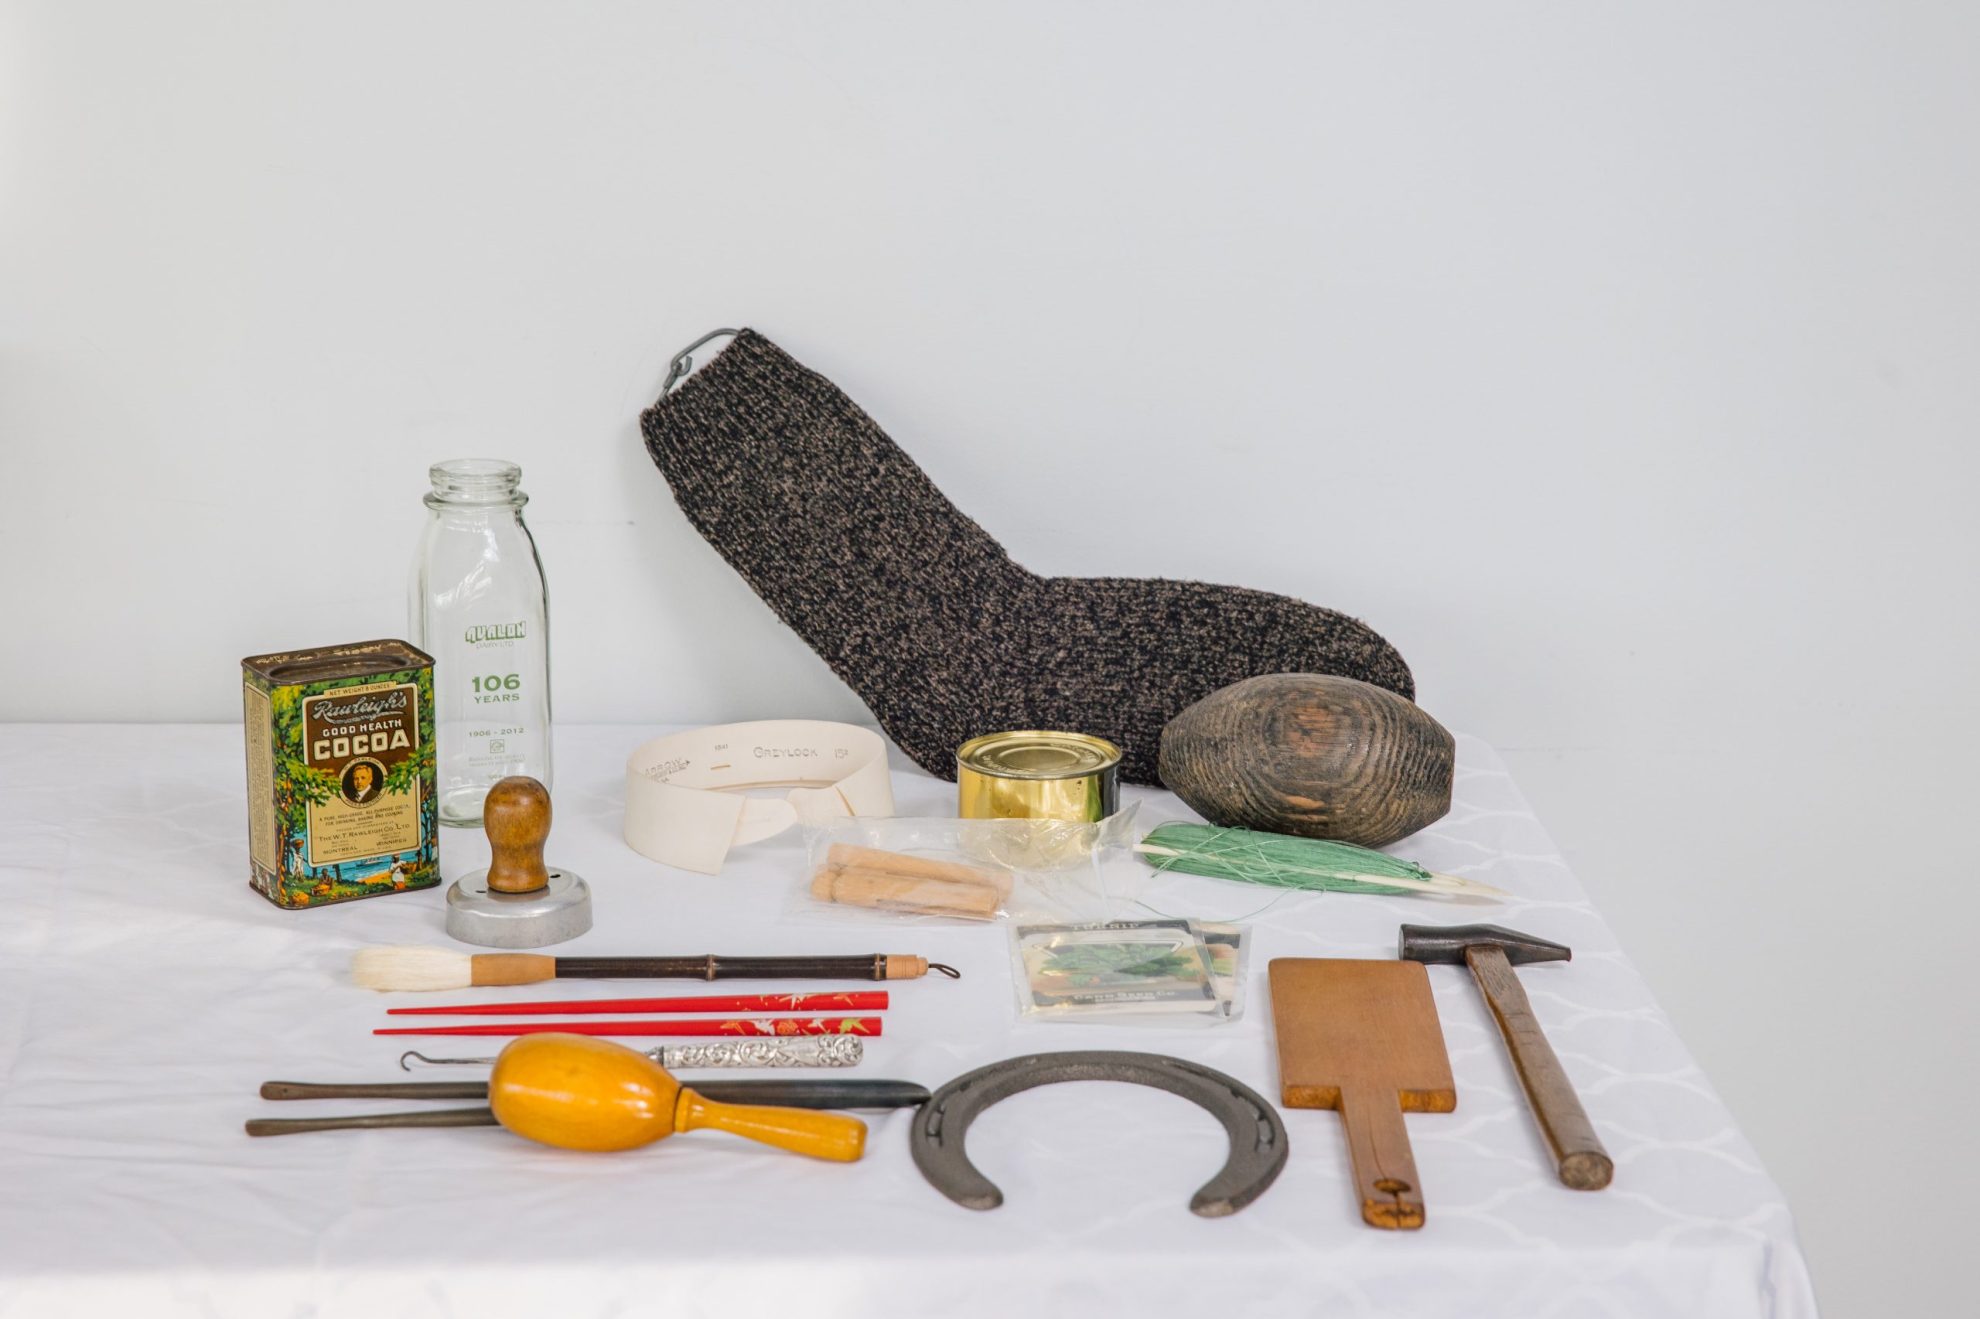 Artefacts from the Mudflatters education kit, on display on a white table